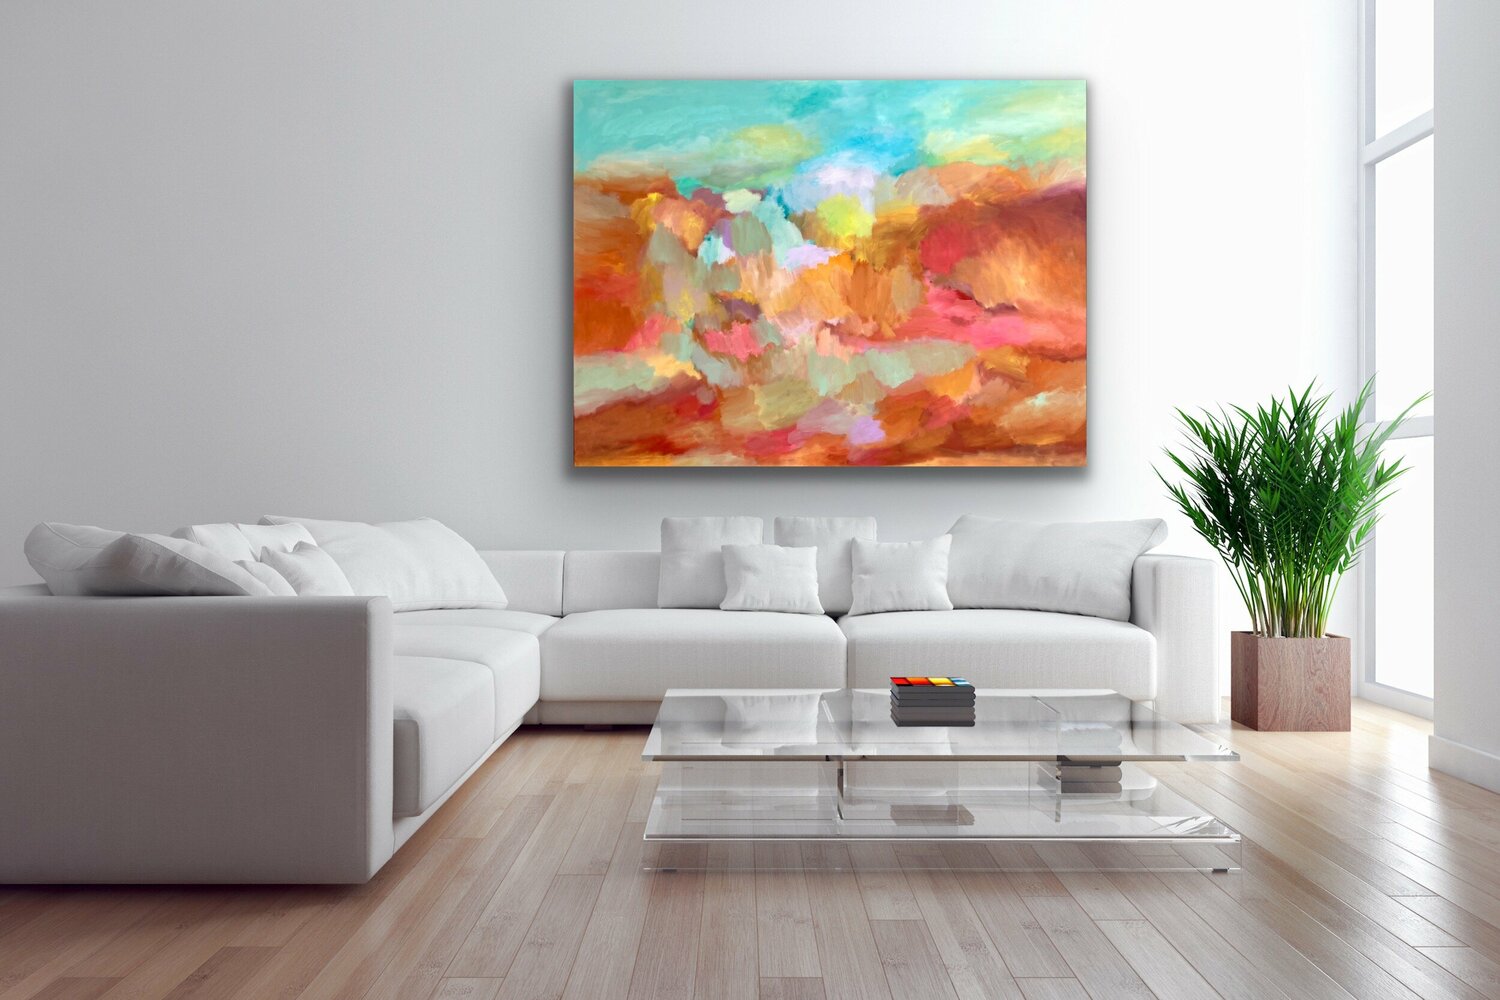 Sunset Dreams by Theo Papathomas (2021) : Painting Acrylic on Canvas ...